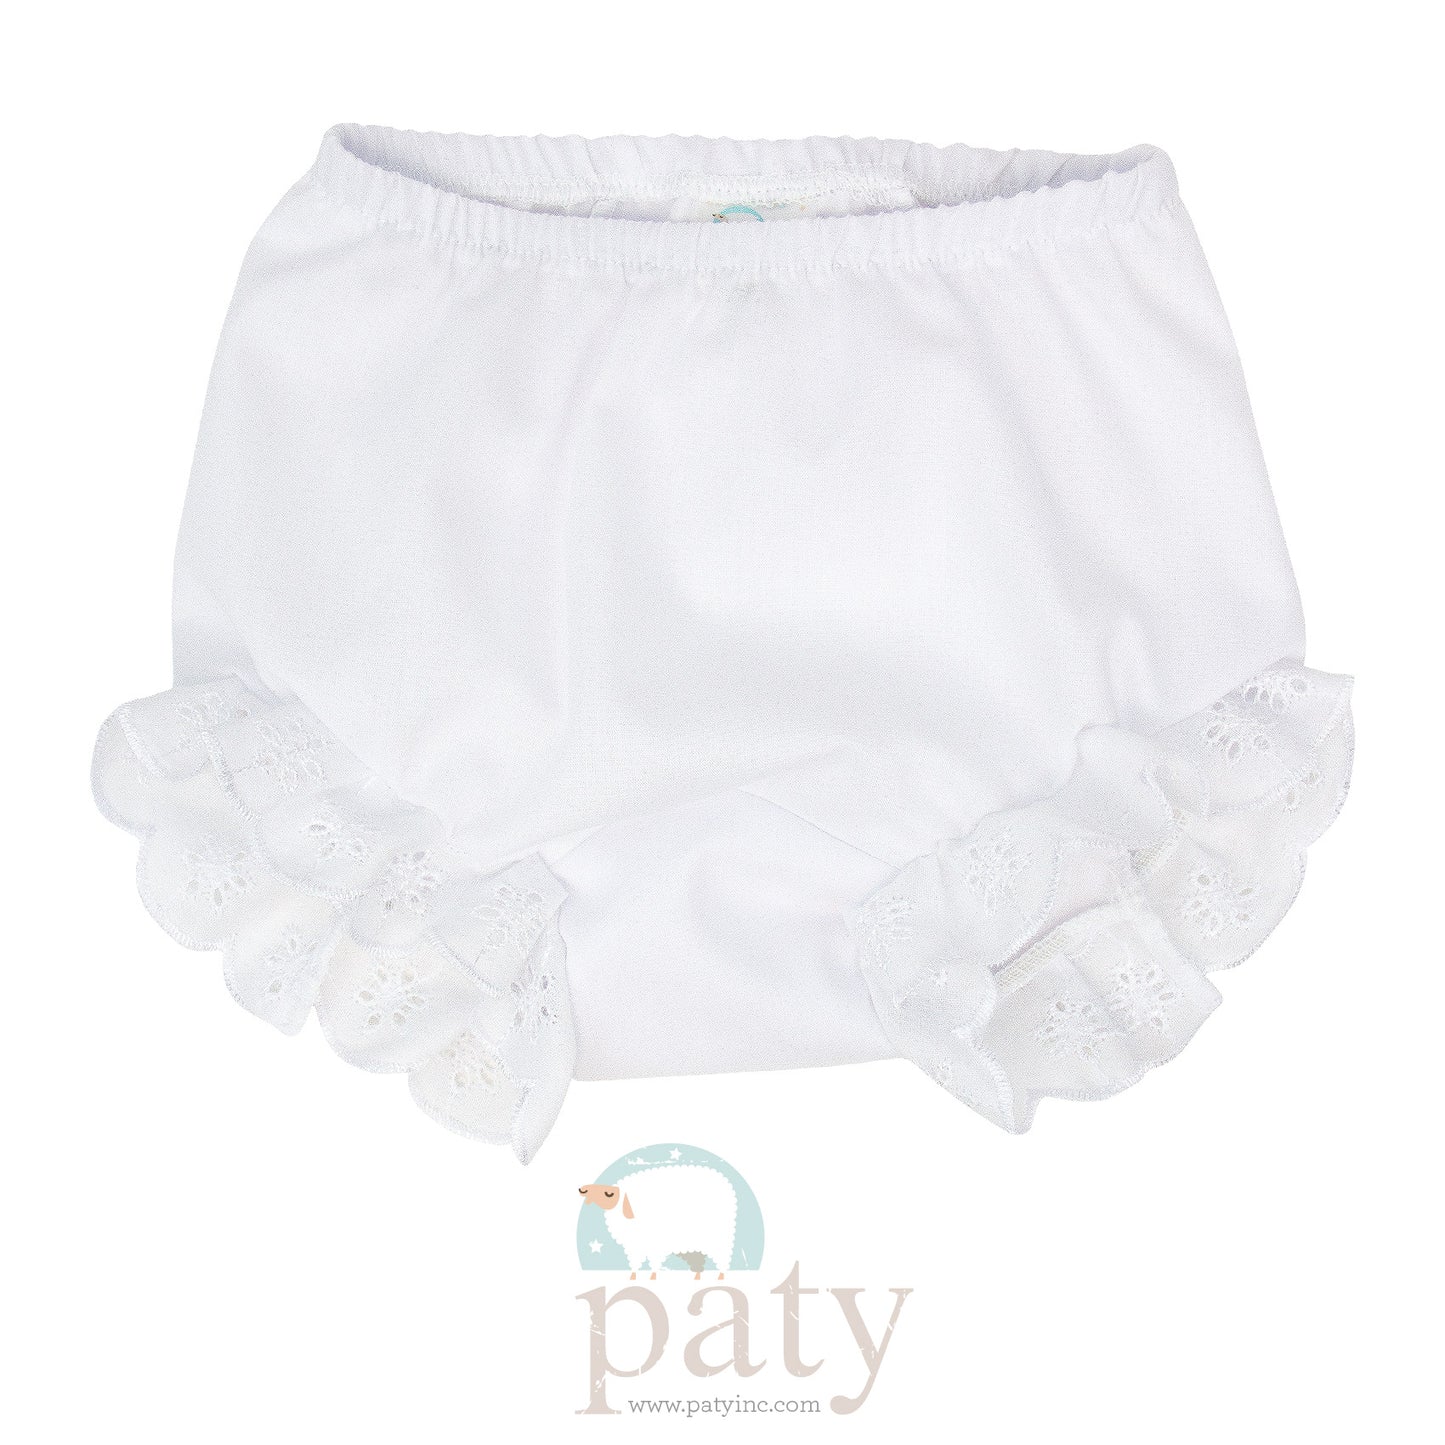 Diaper Cover with Eyelet - White